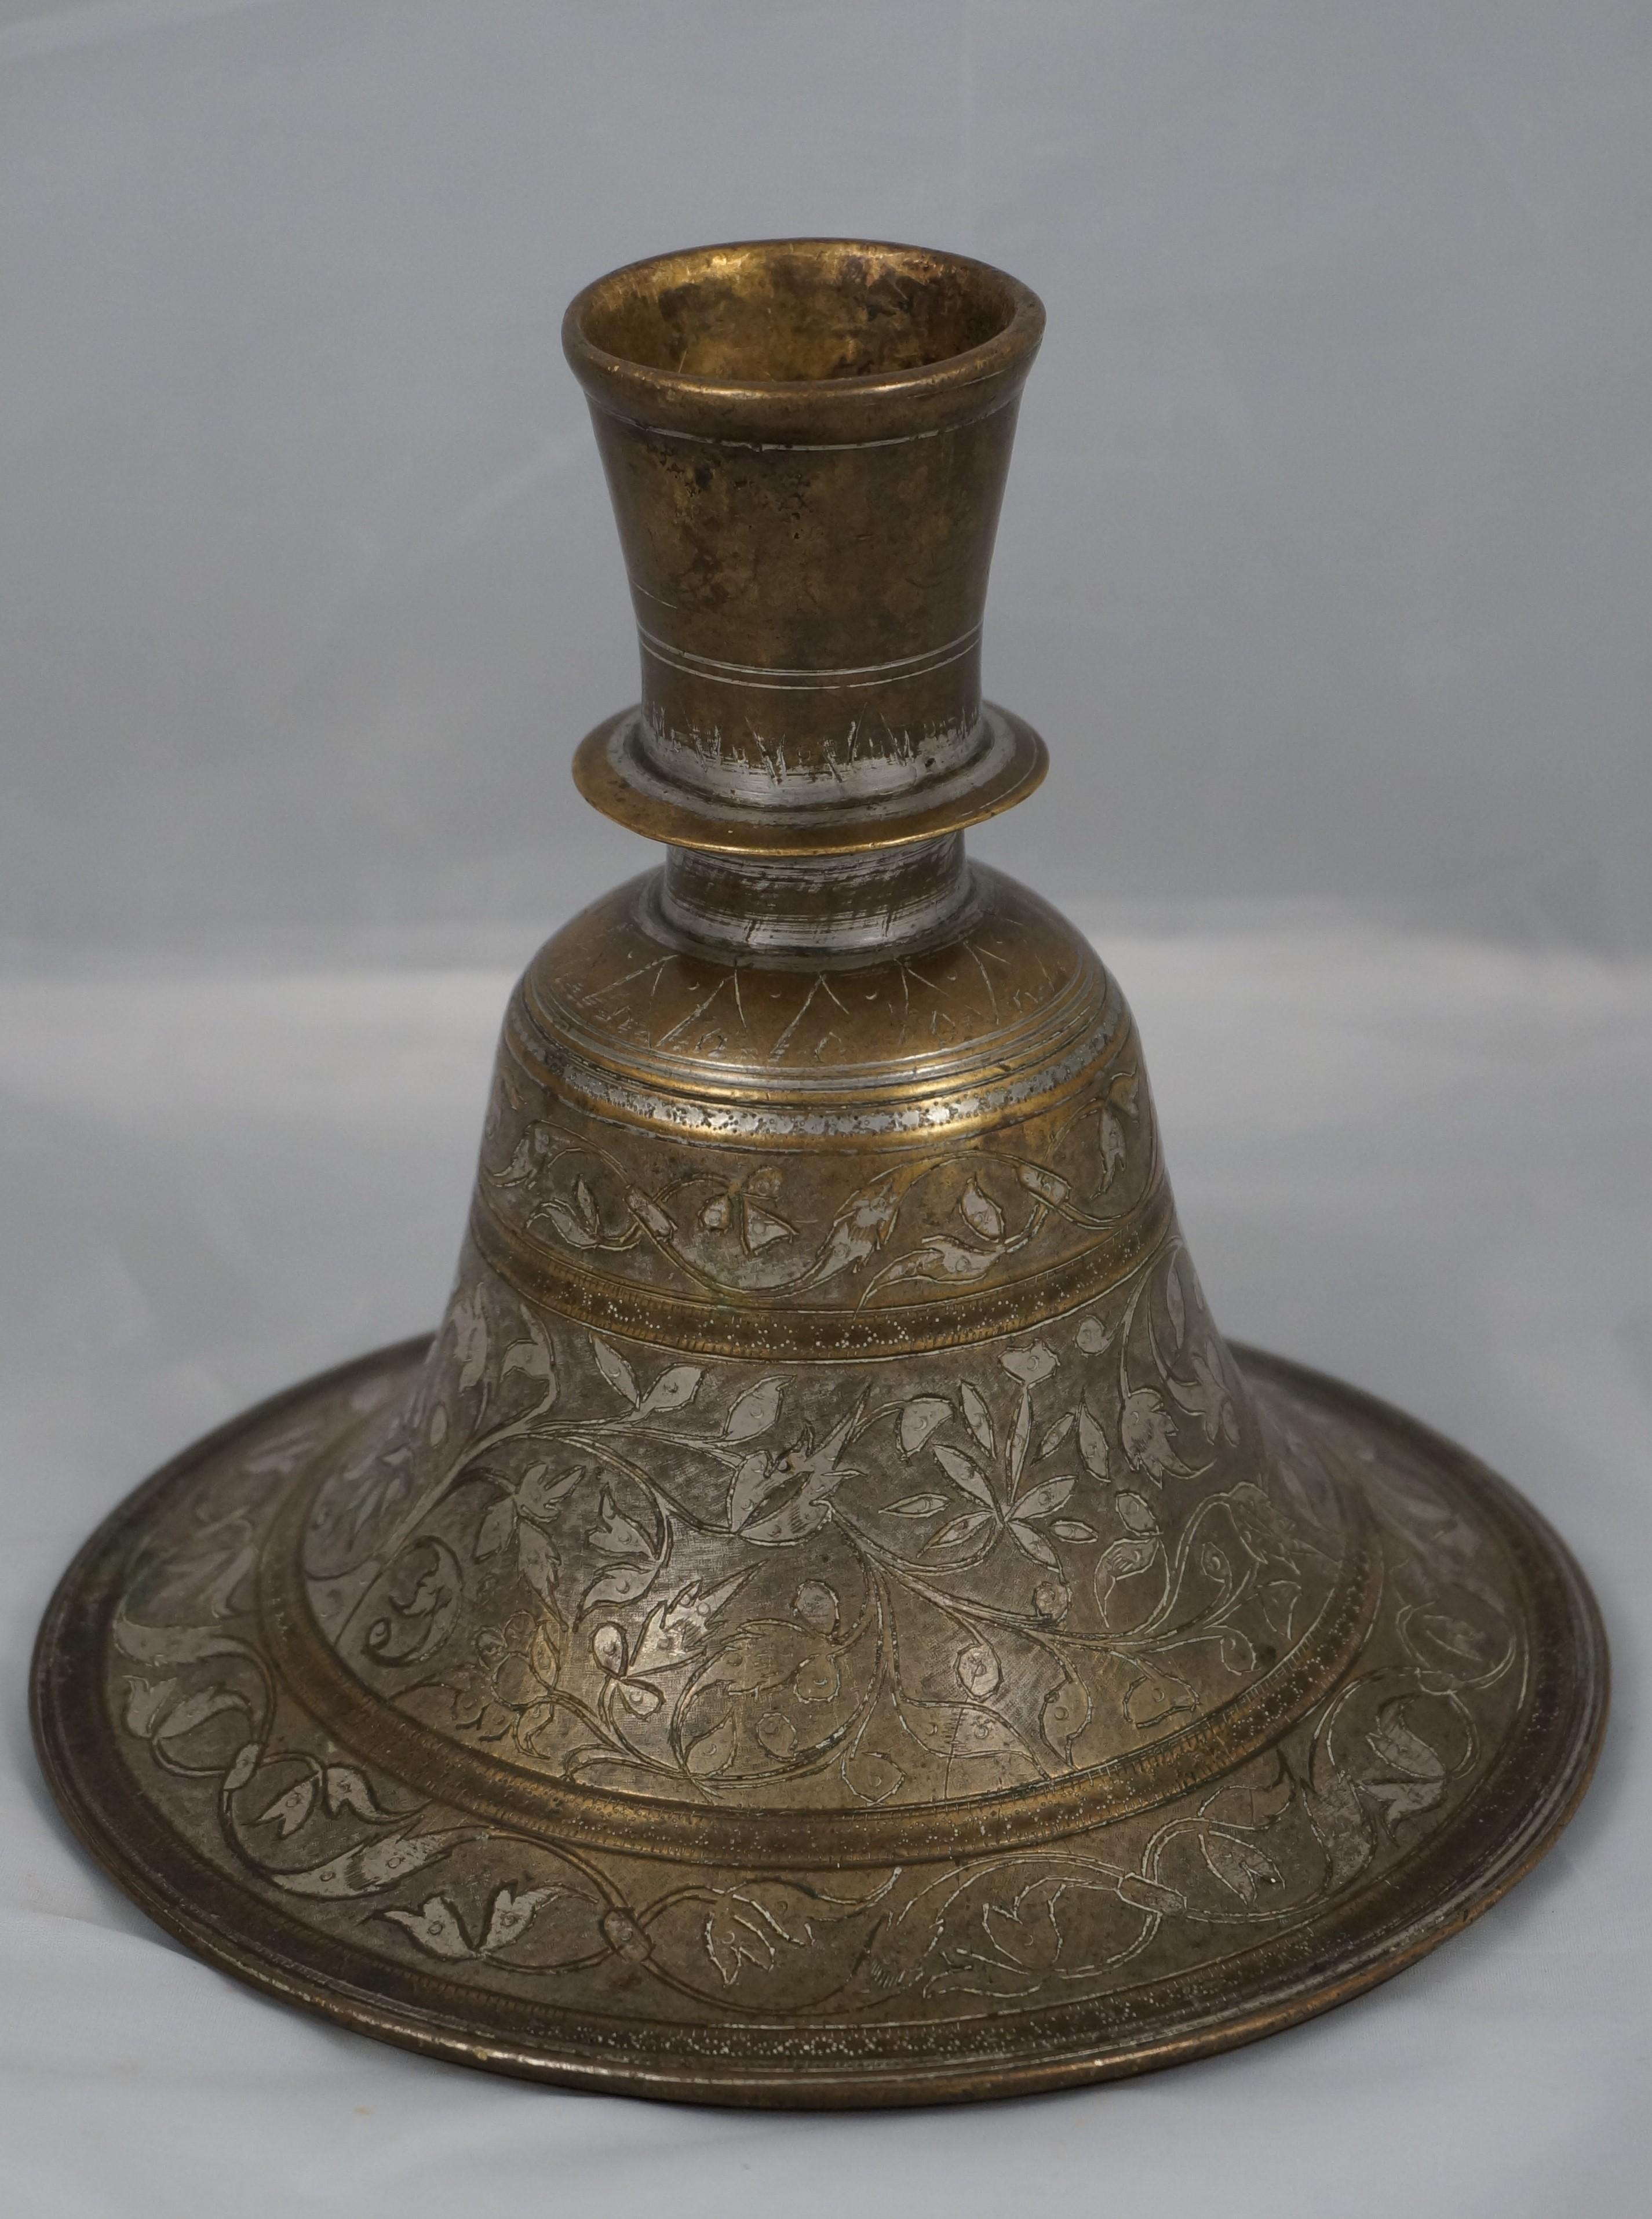 Indian Bidri Hookah Base, decorated with floral patterns and folliage.

India, Bidri ware, 19th century.

In fairly good condition, worn due to age (see images).

Dimensions: 16 cm. heigh, diameter 17.2 cm.